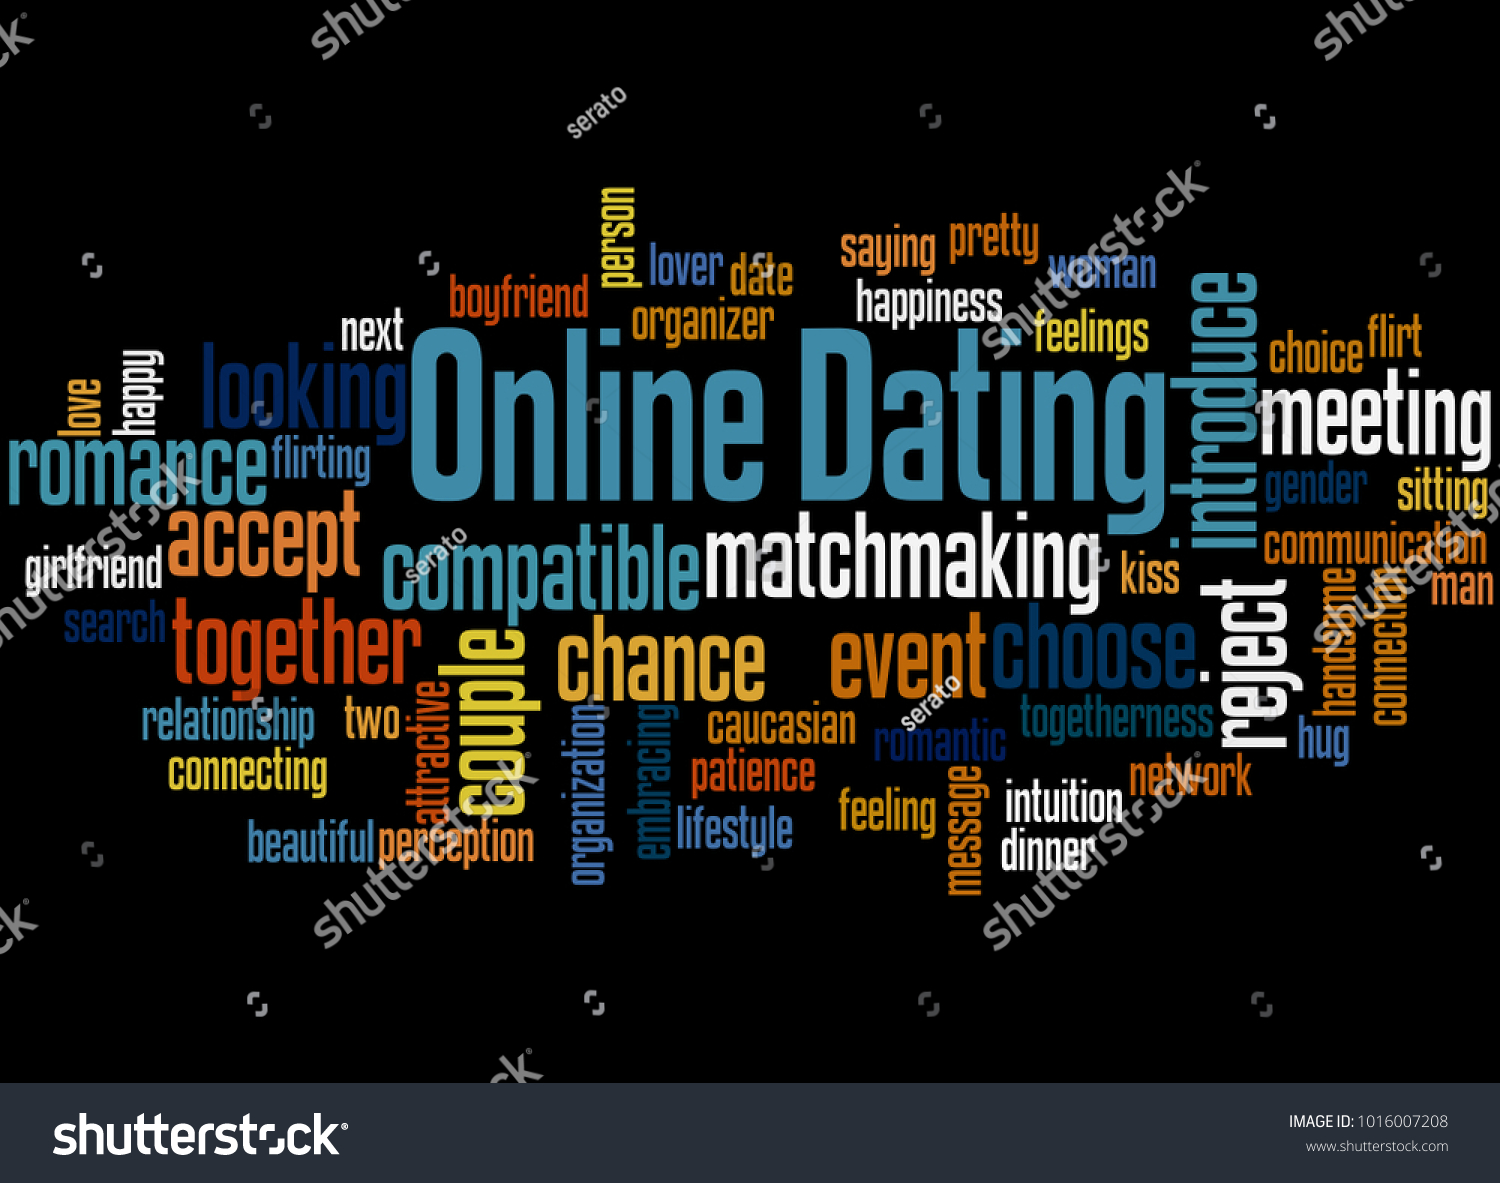 how to detect online dating creeper